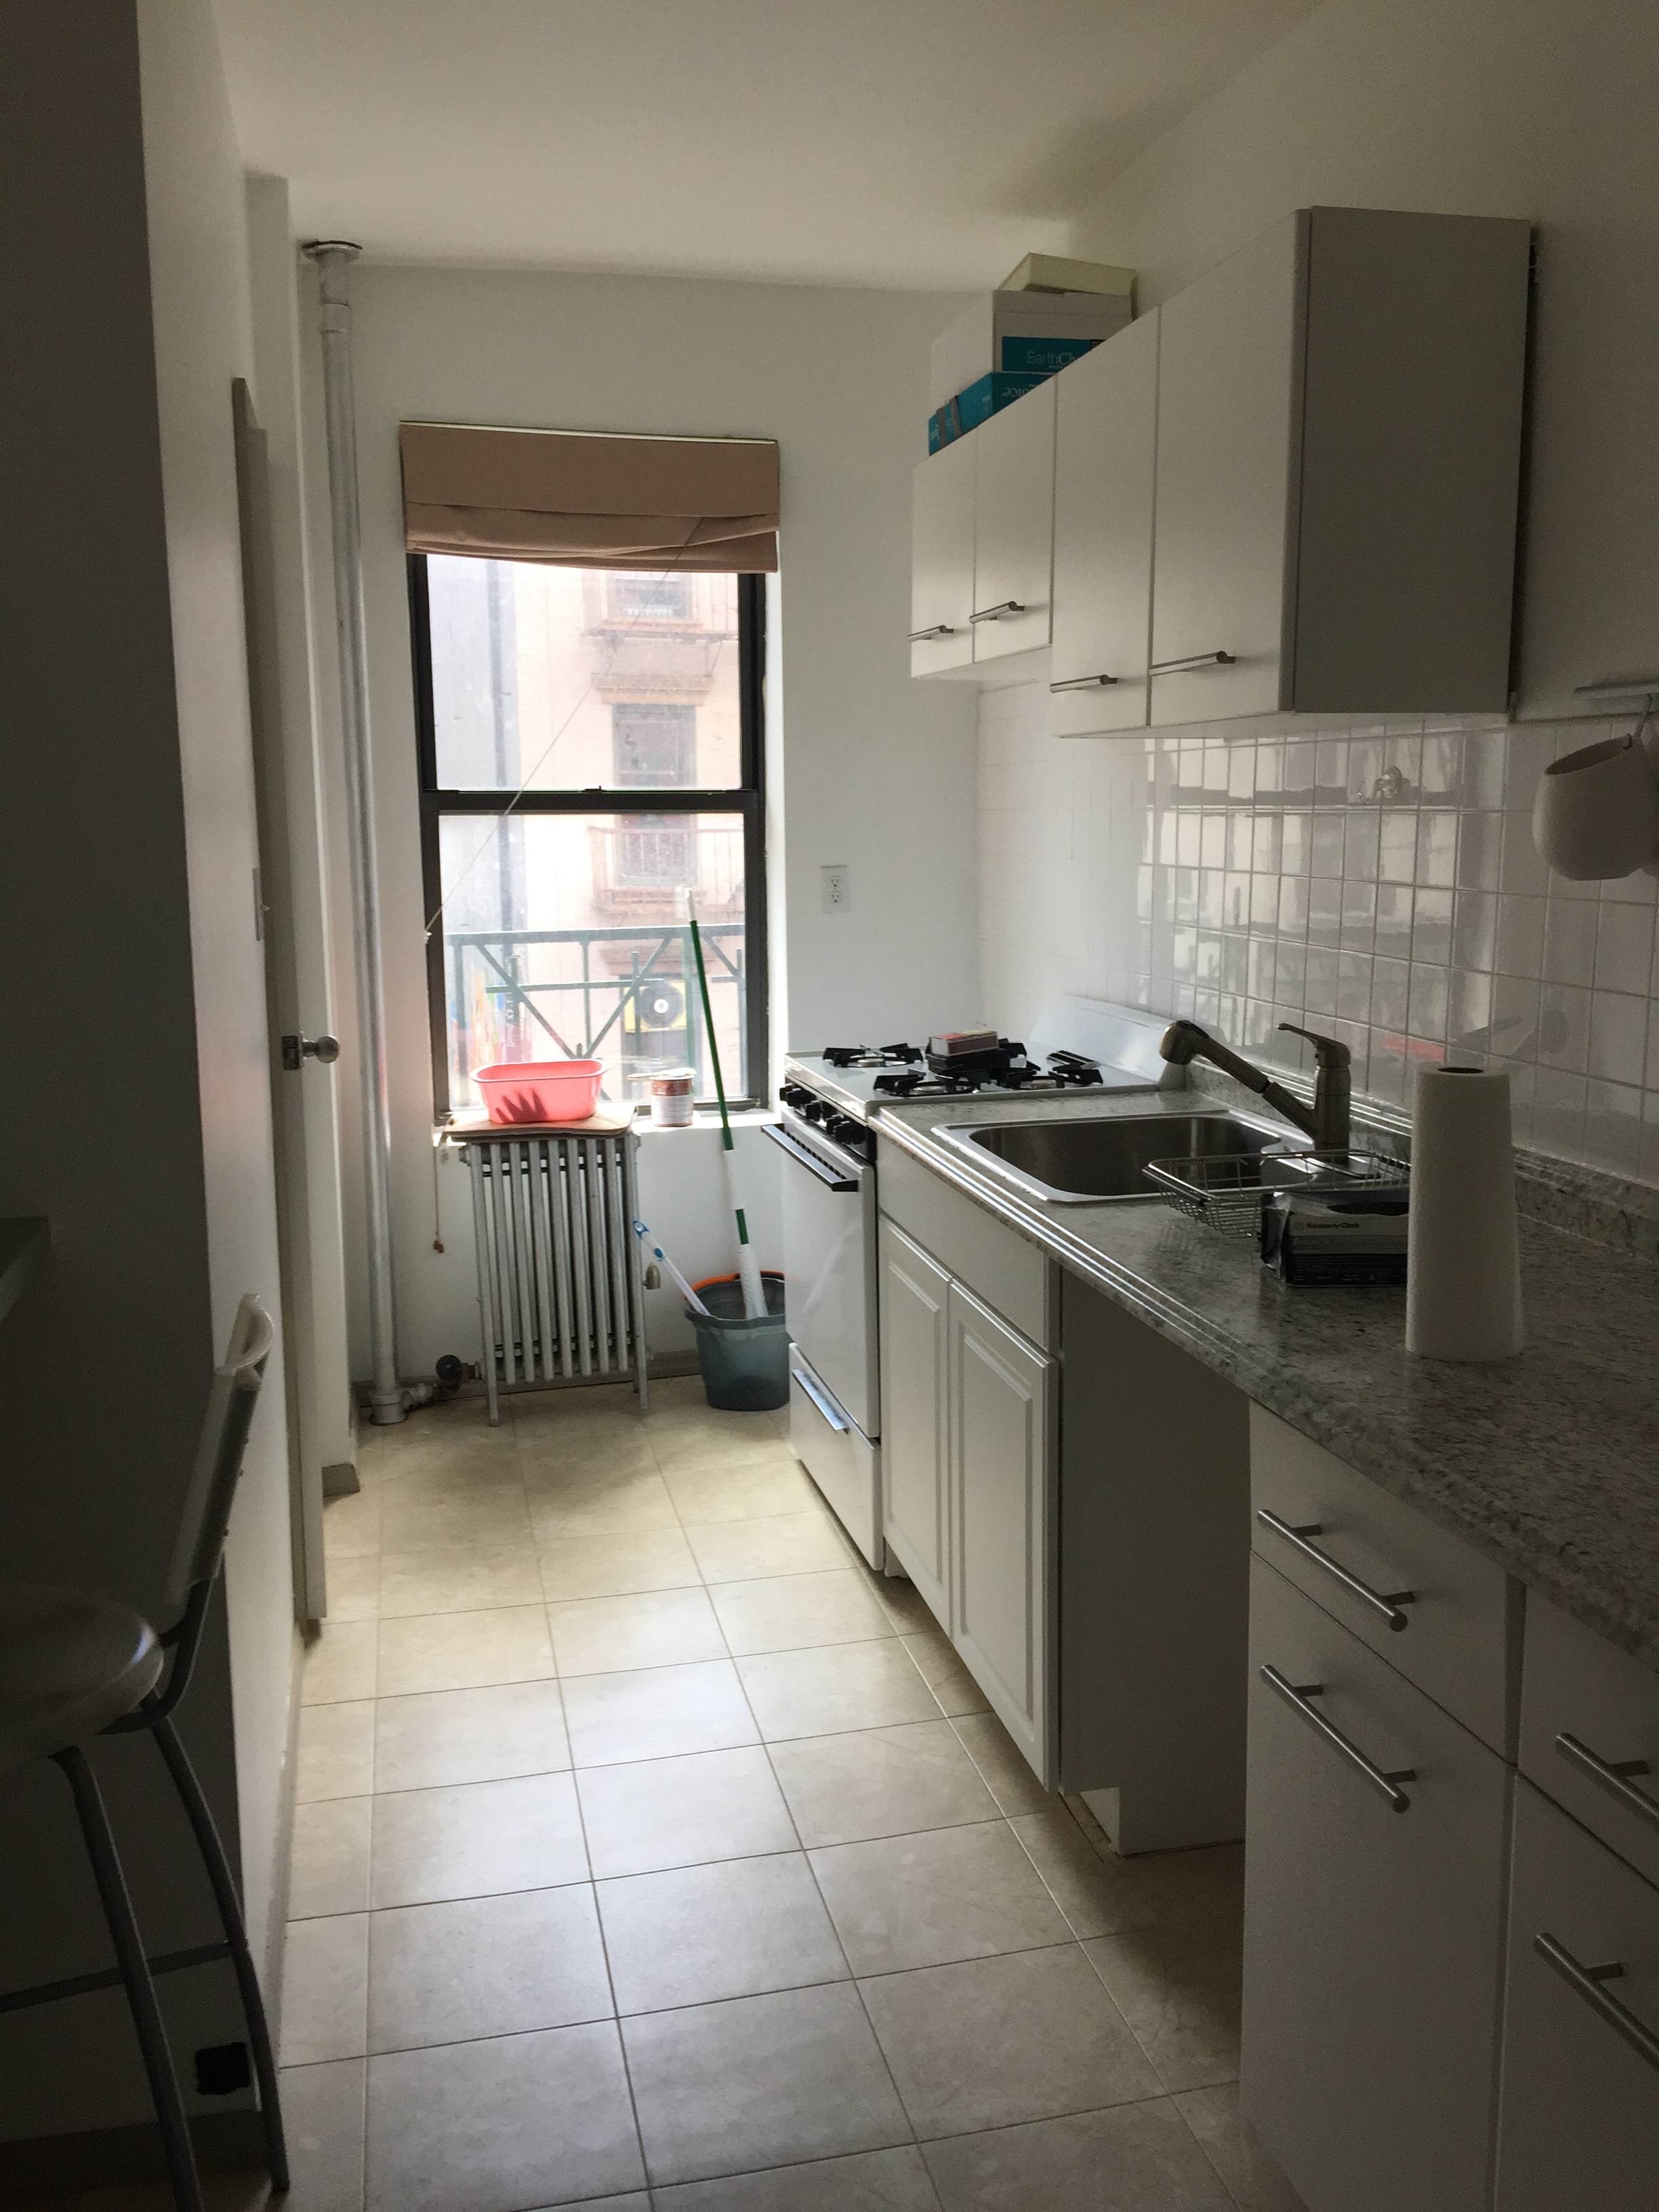 MUST SEE PRIME NOLITA/SOHO Large One Bedroom Available - $2700